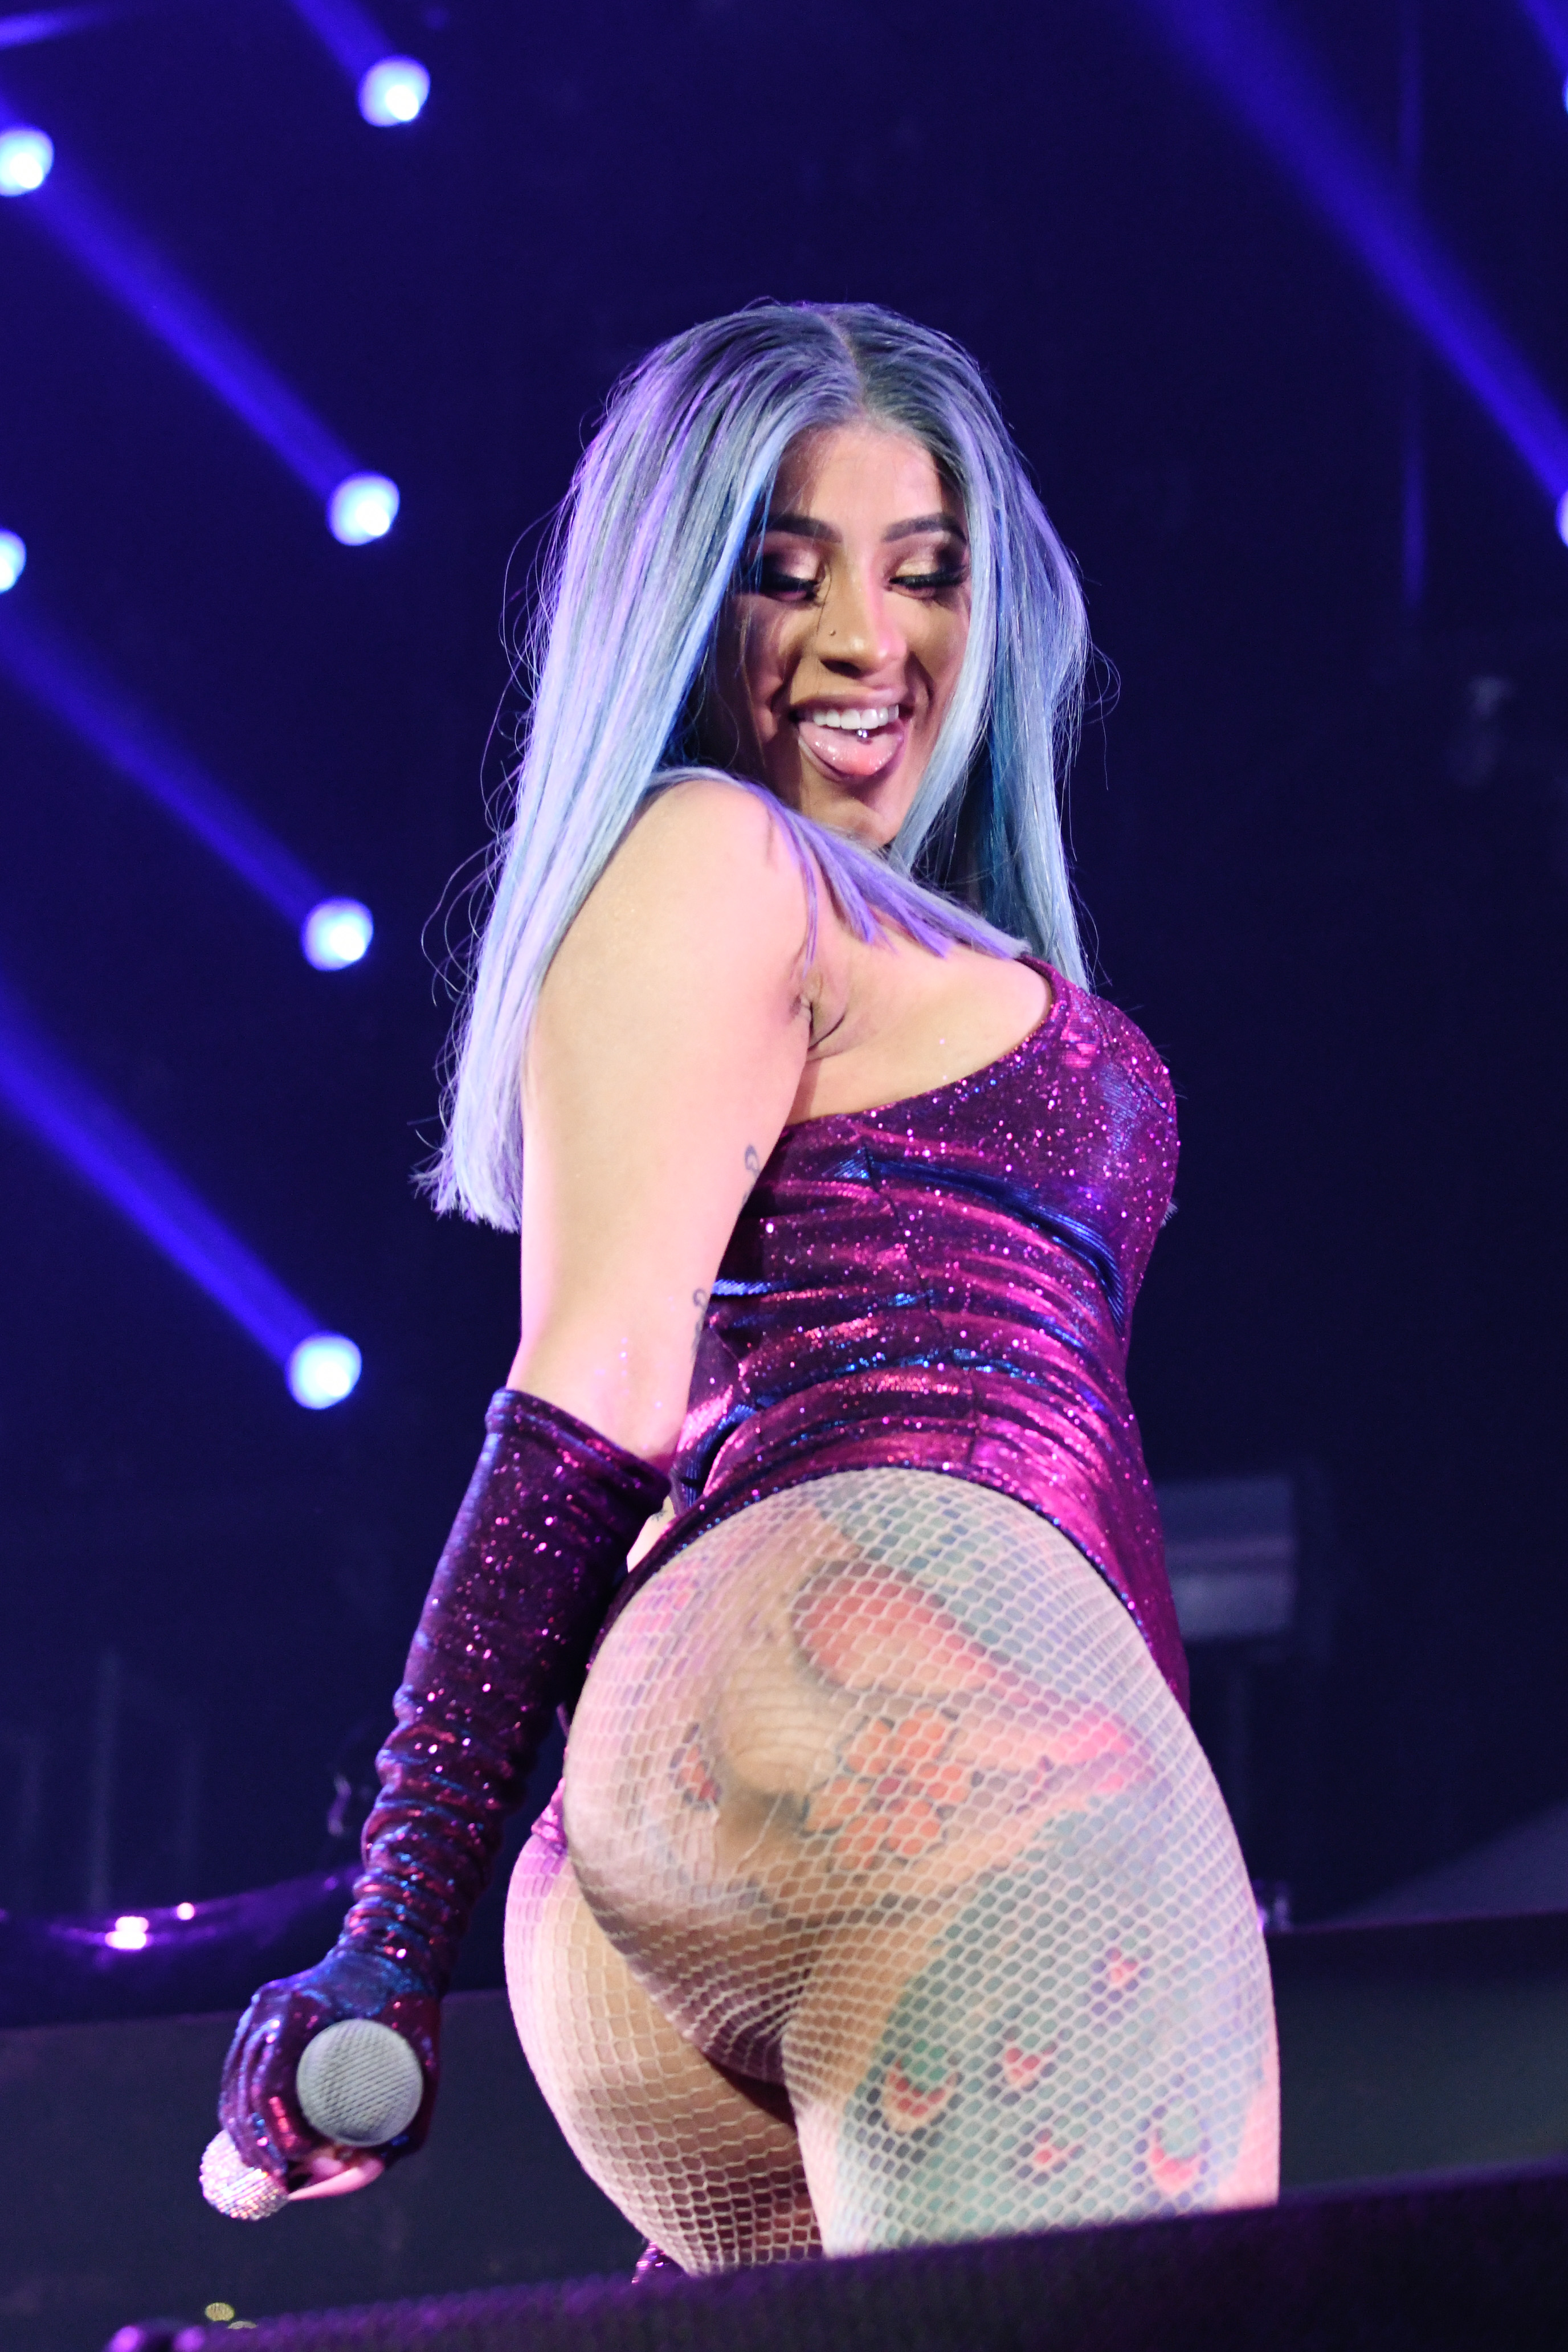 Cardi B Performs At The Staple Center During BET Experience, Wins Album